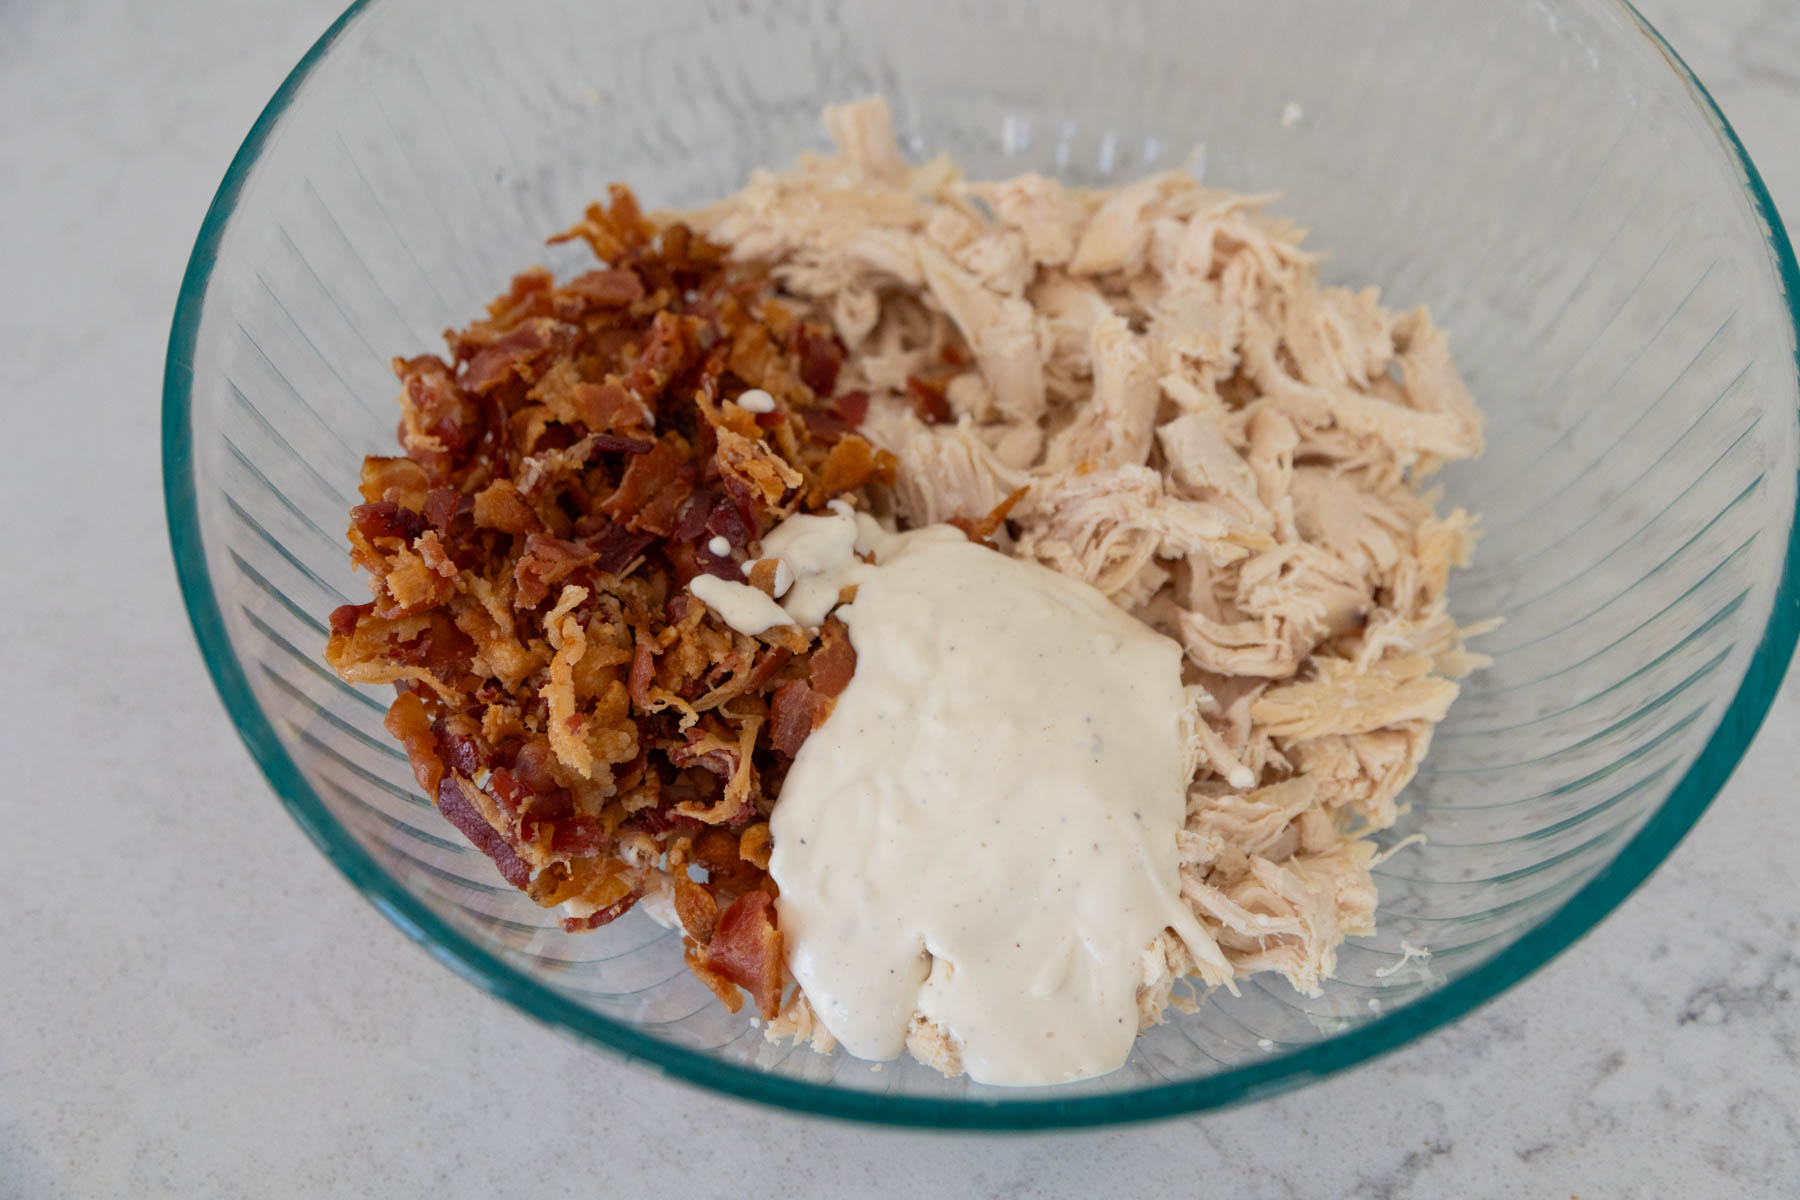 The shredded rotisserie chicken meat is in a mixing bowl with crumbled bacon and ranch dressing.